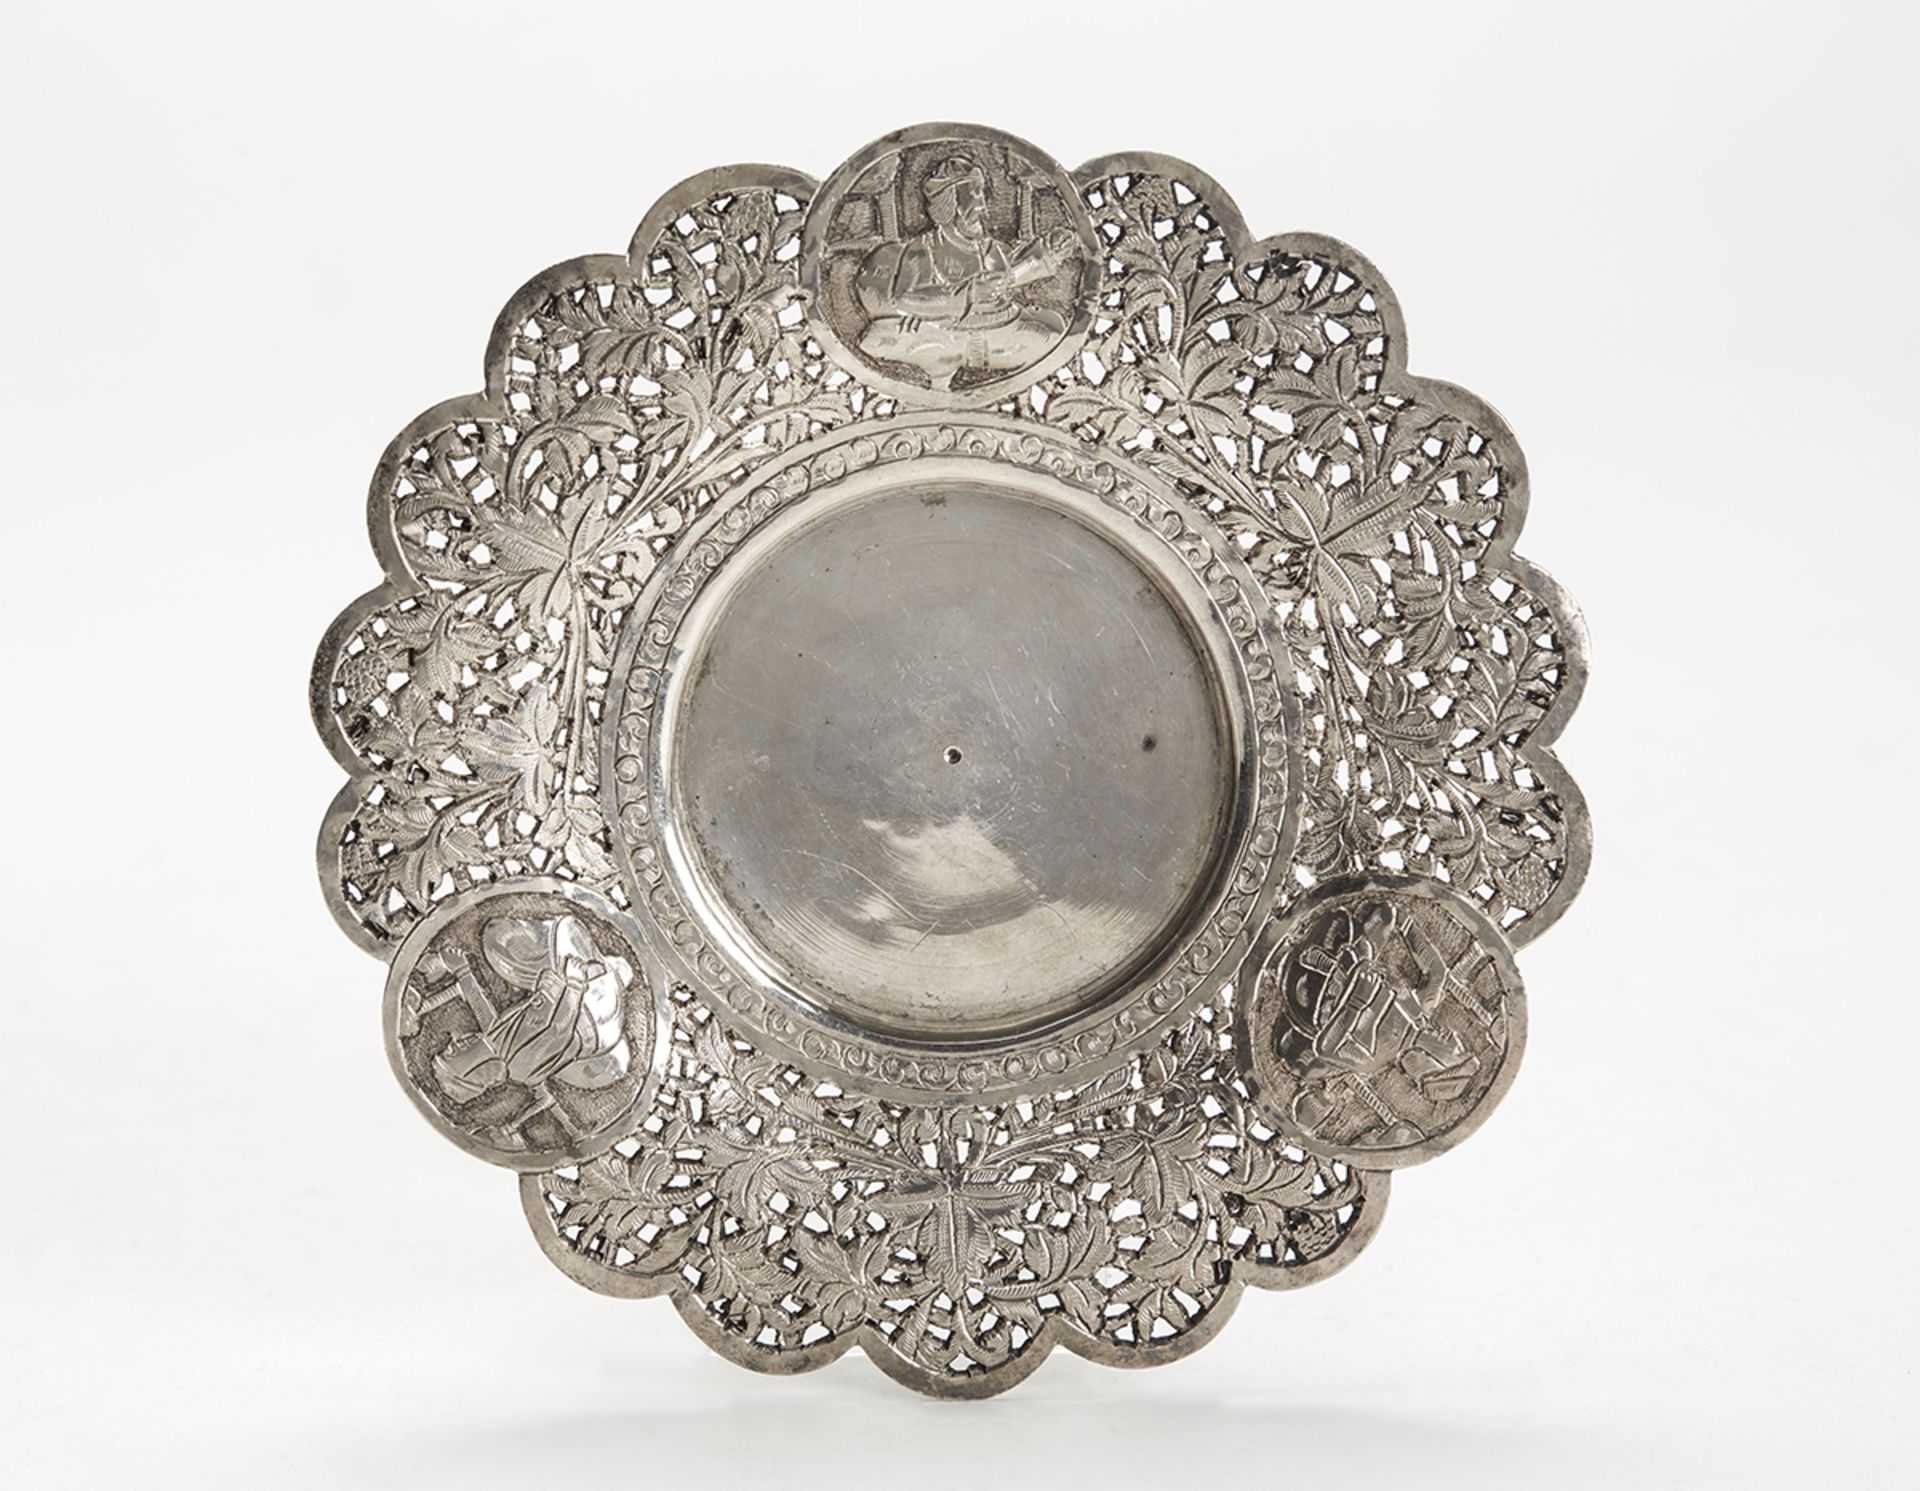 Antique Indian/Asian Silver Reticulated Dish Or Stand 19C.